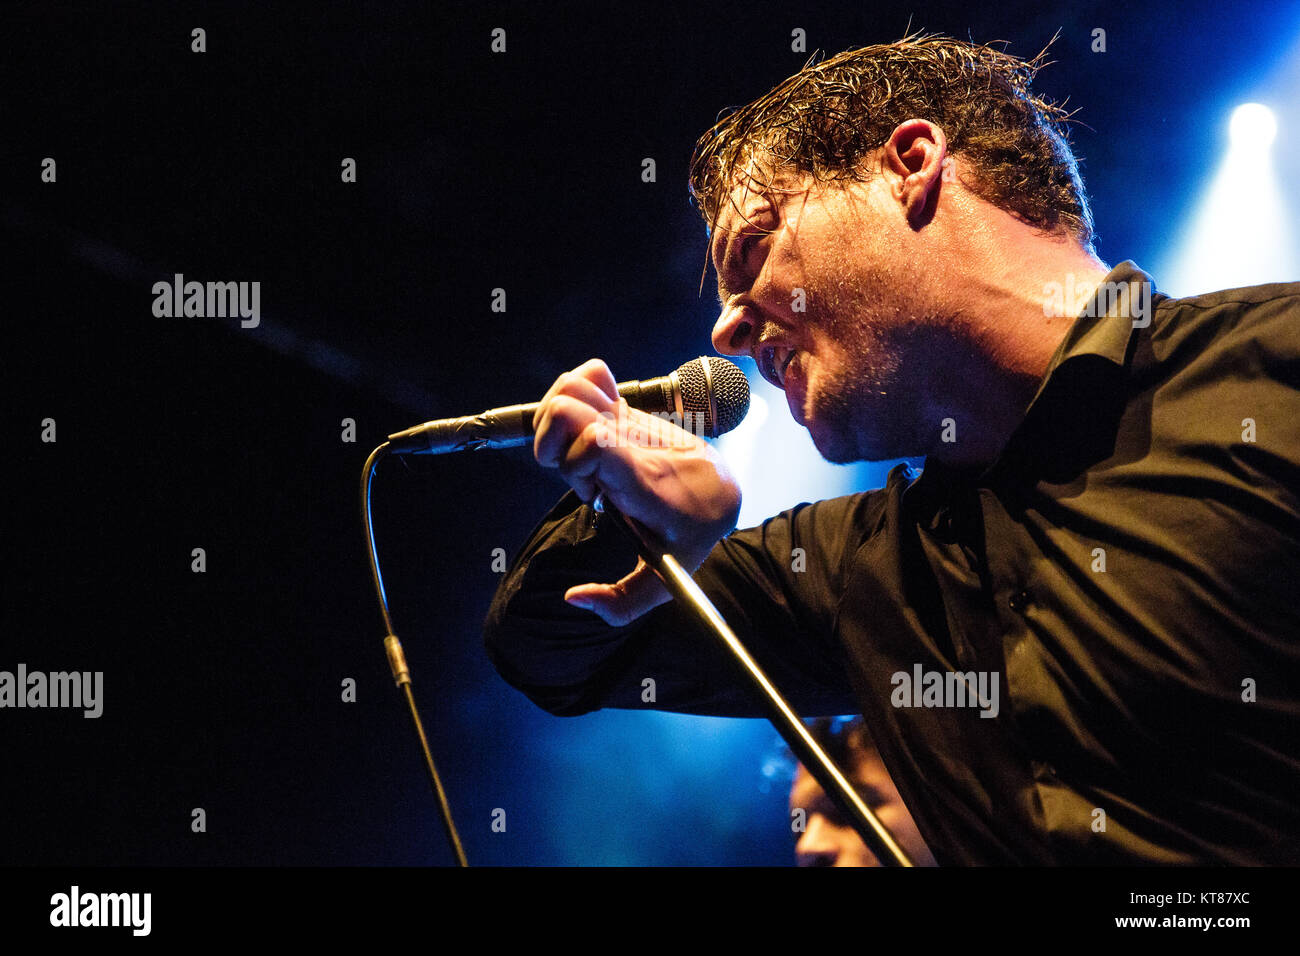 The American black metal band Deafheaven performs a live concert at Amager Bio in Copenhagen. Here vocalist George Clarke is seen live on stage. Denmark, 17/03 2016. Stock Photo